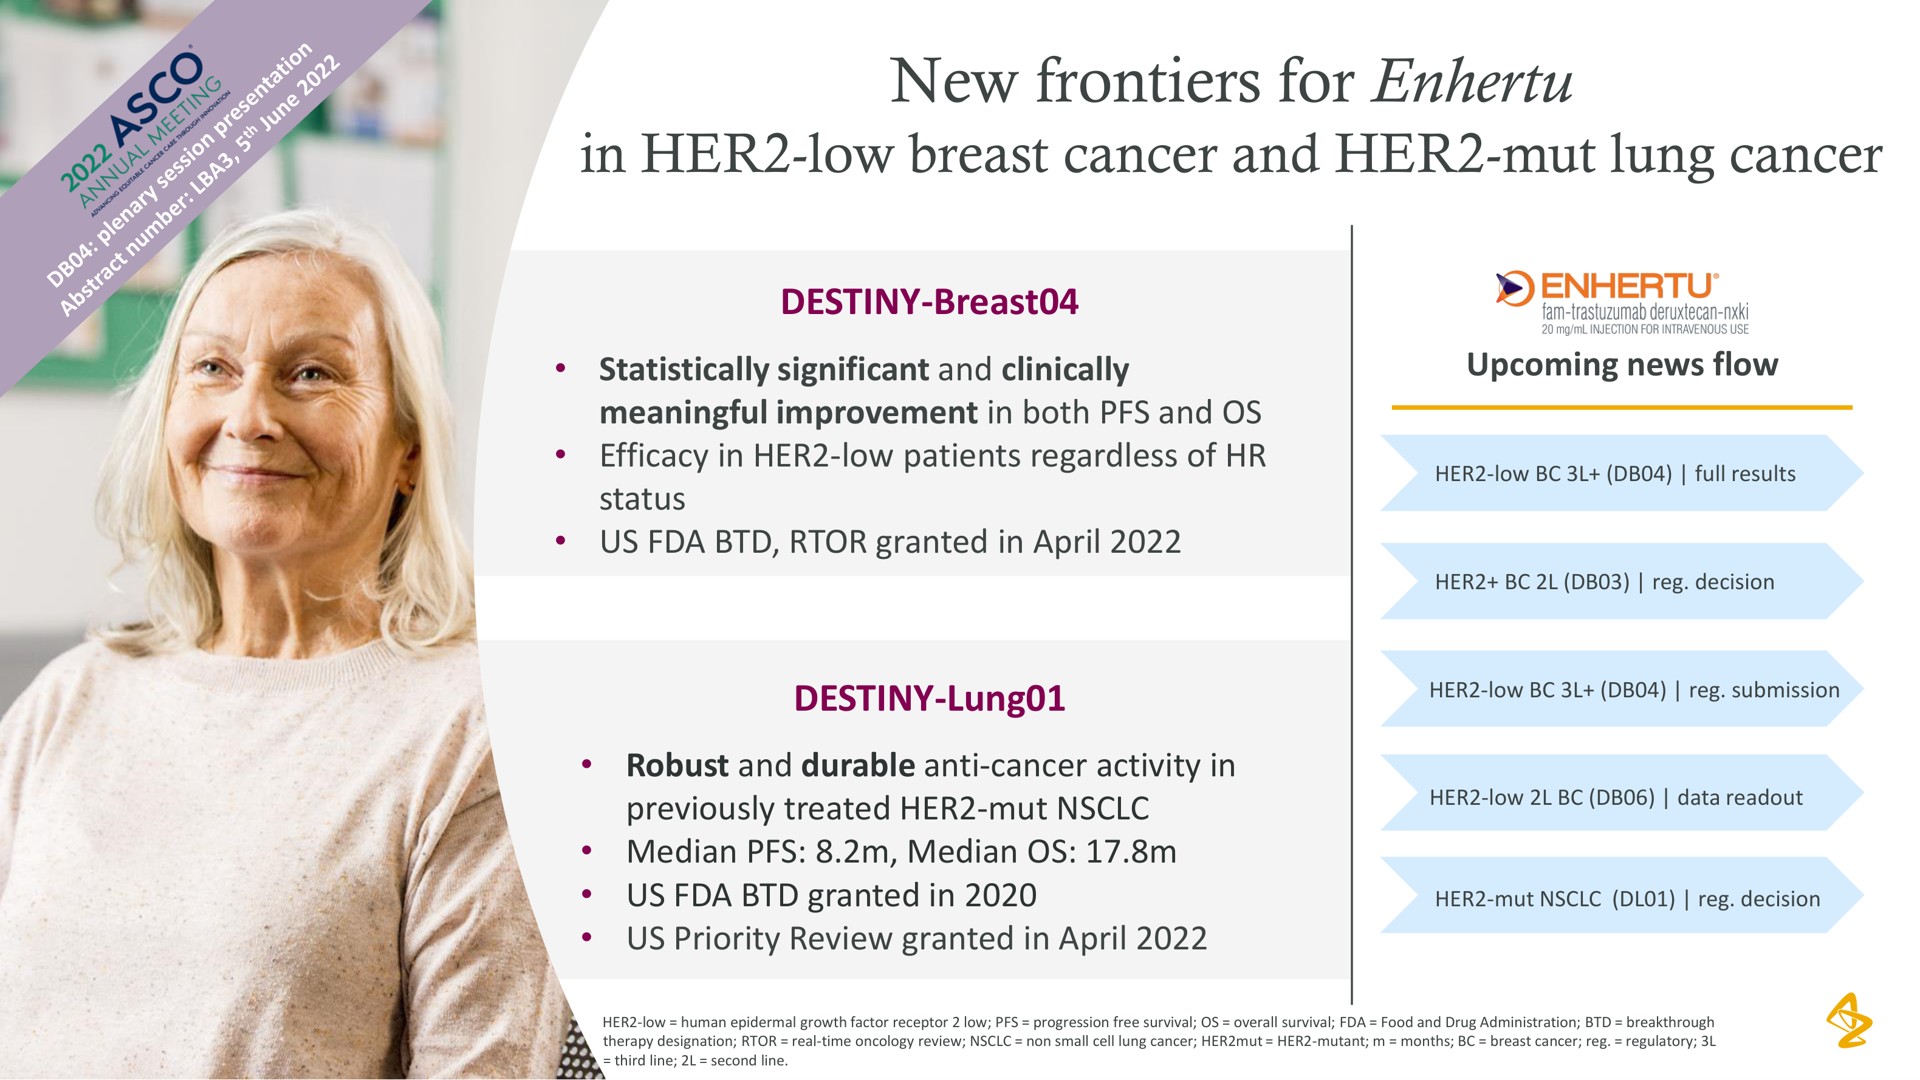 new frontiers for in her low breast cancer and her lung cancer | AstraZeneca